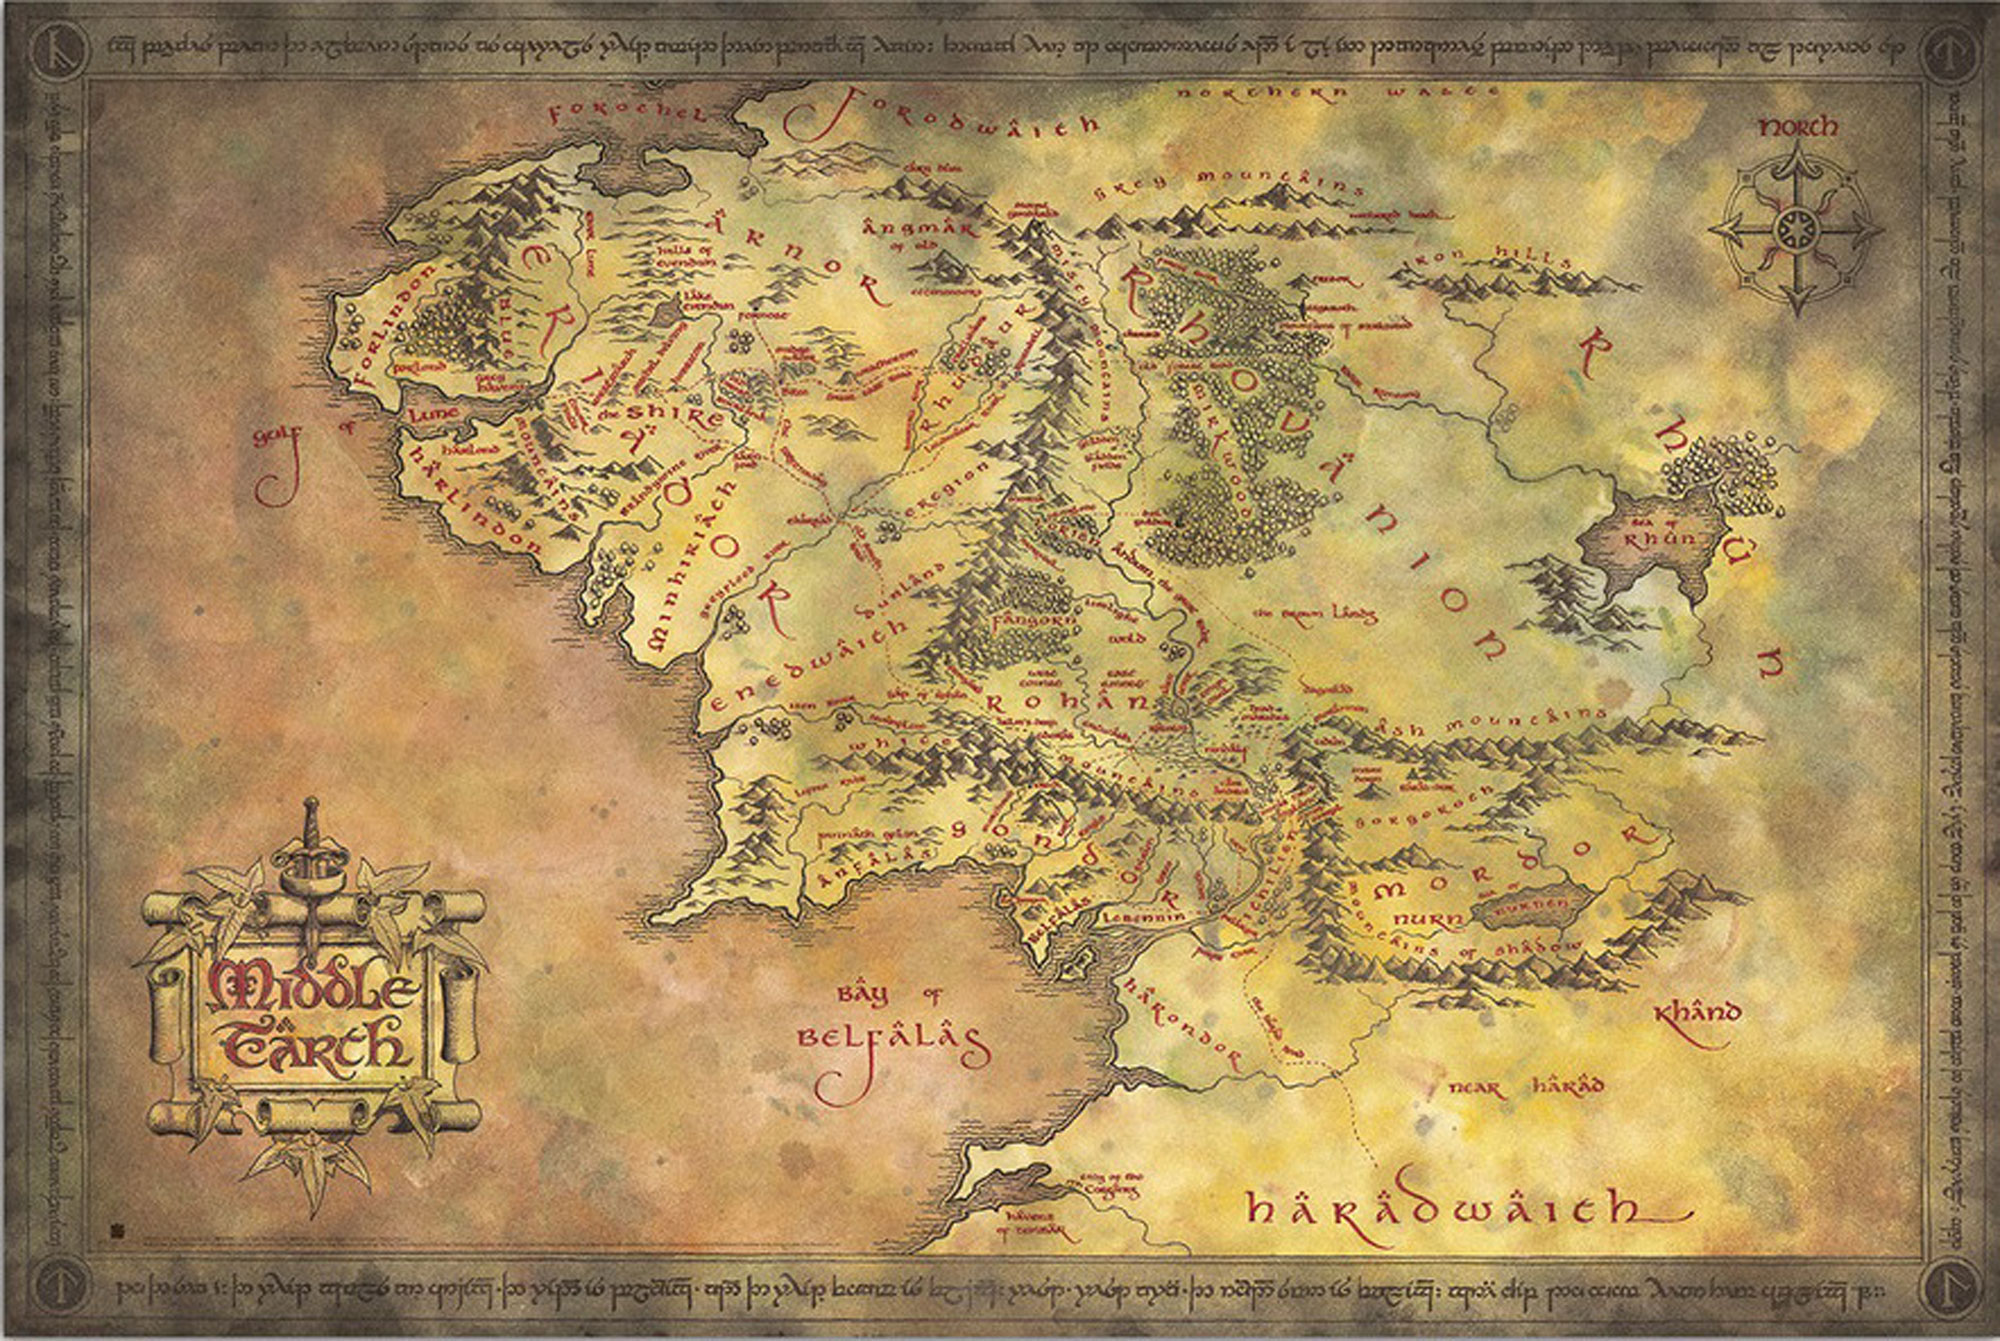 Lord of the The Rings, - of Middle Earth